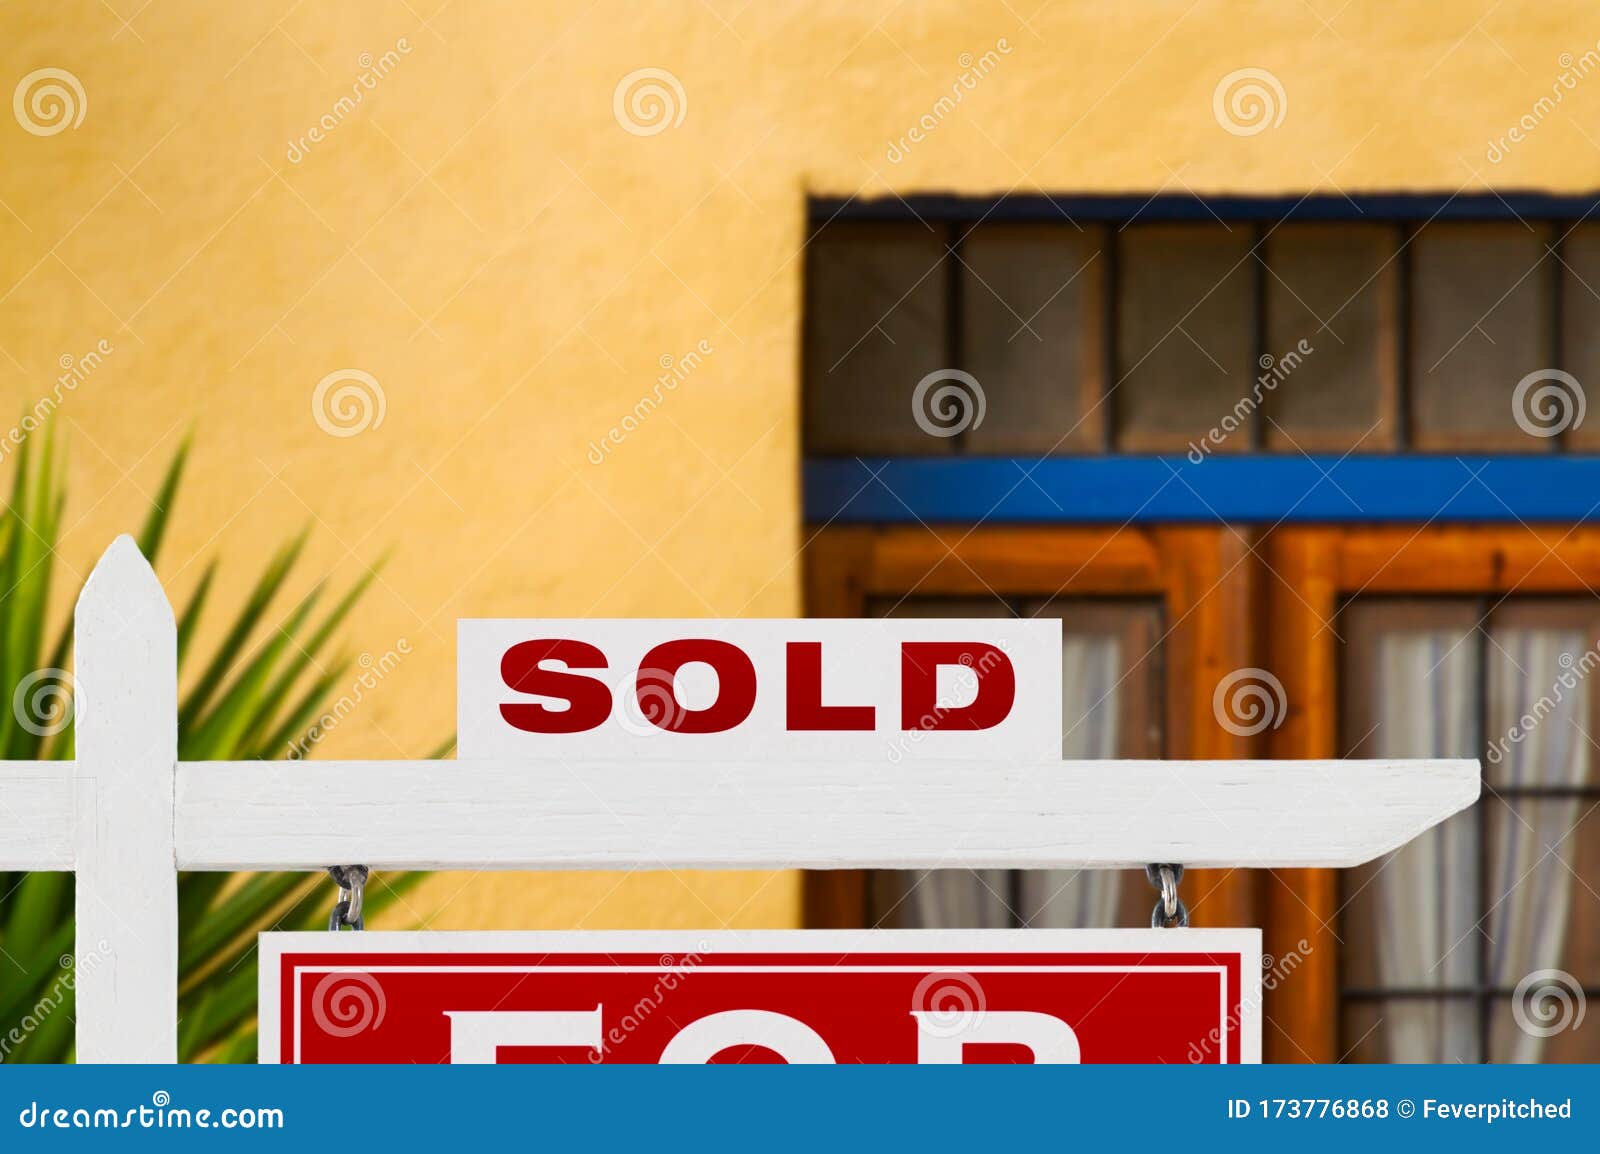 sold home for sale real estate sign and house